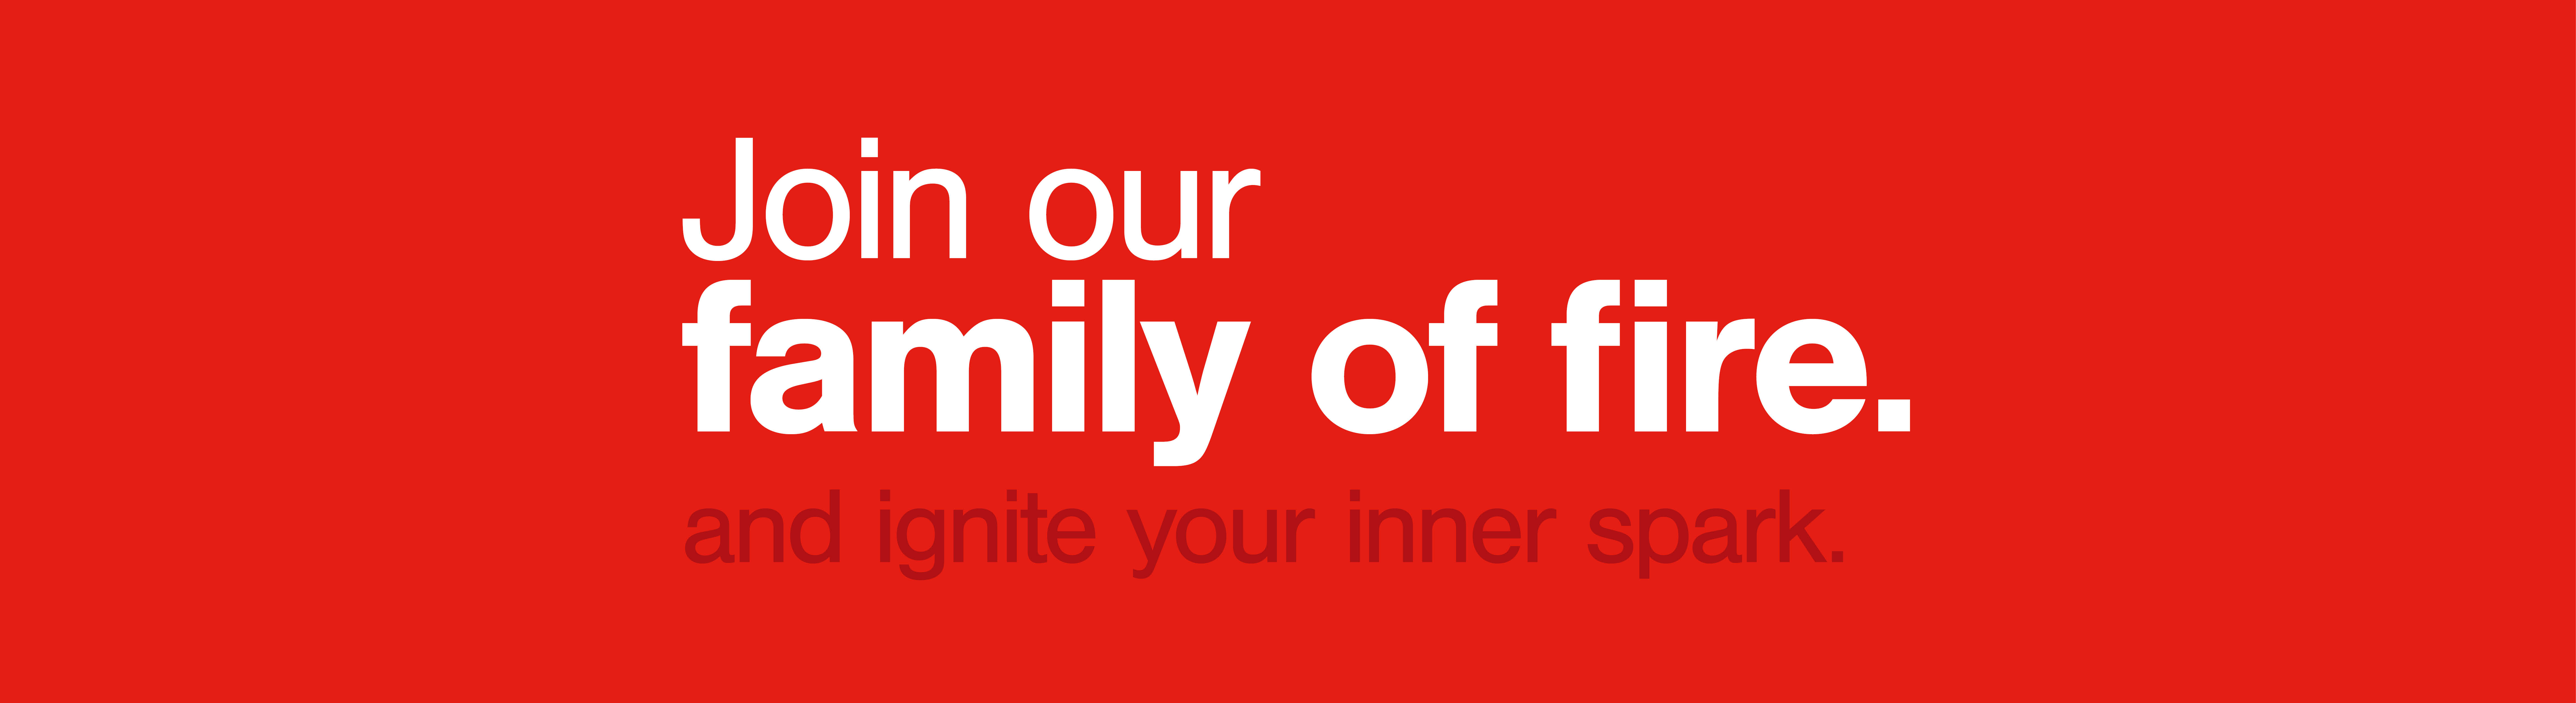 Join our family of fire